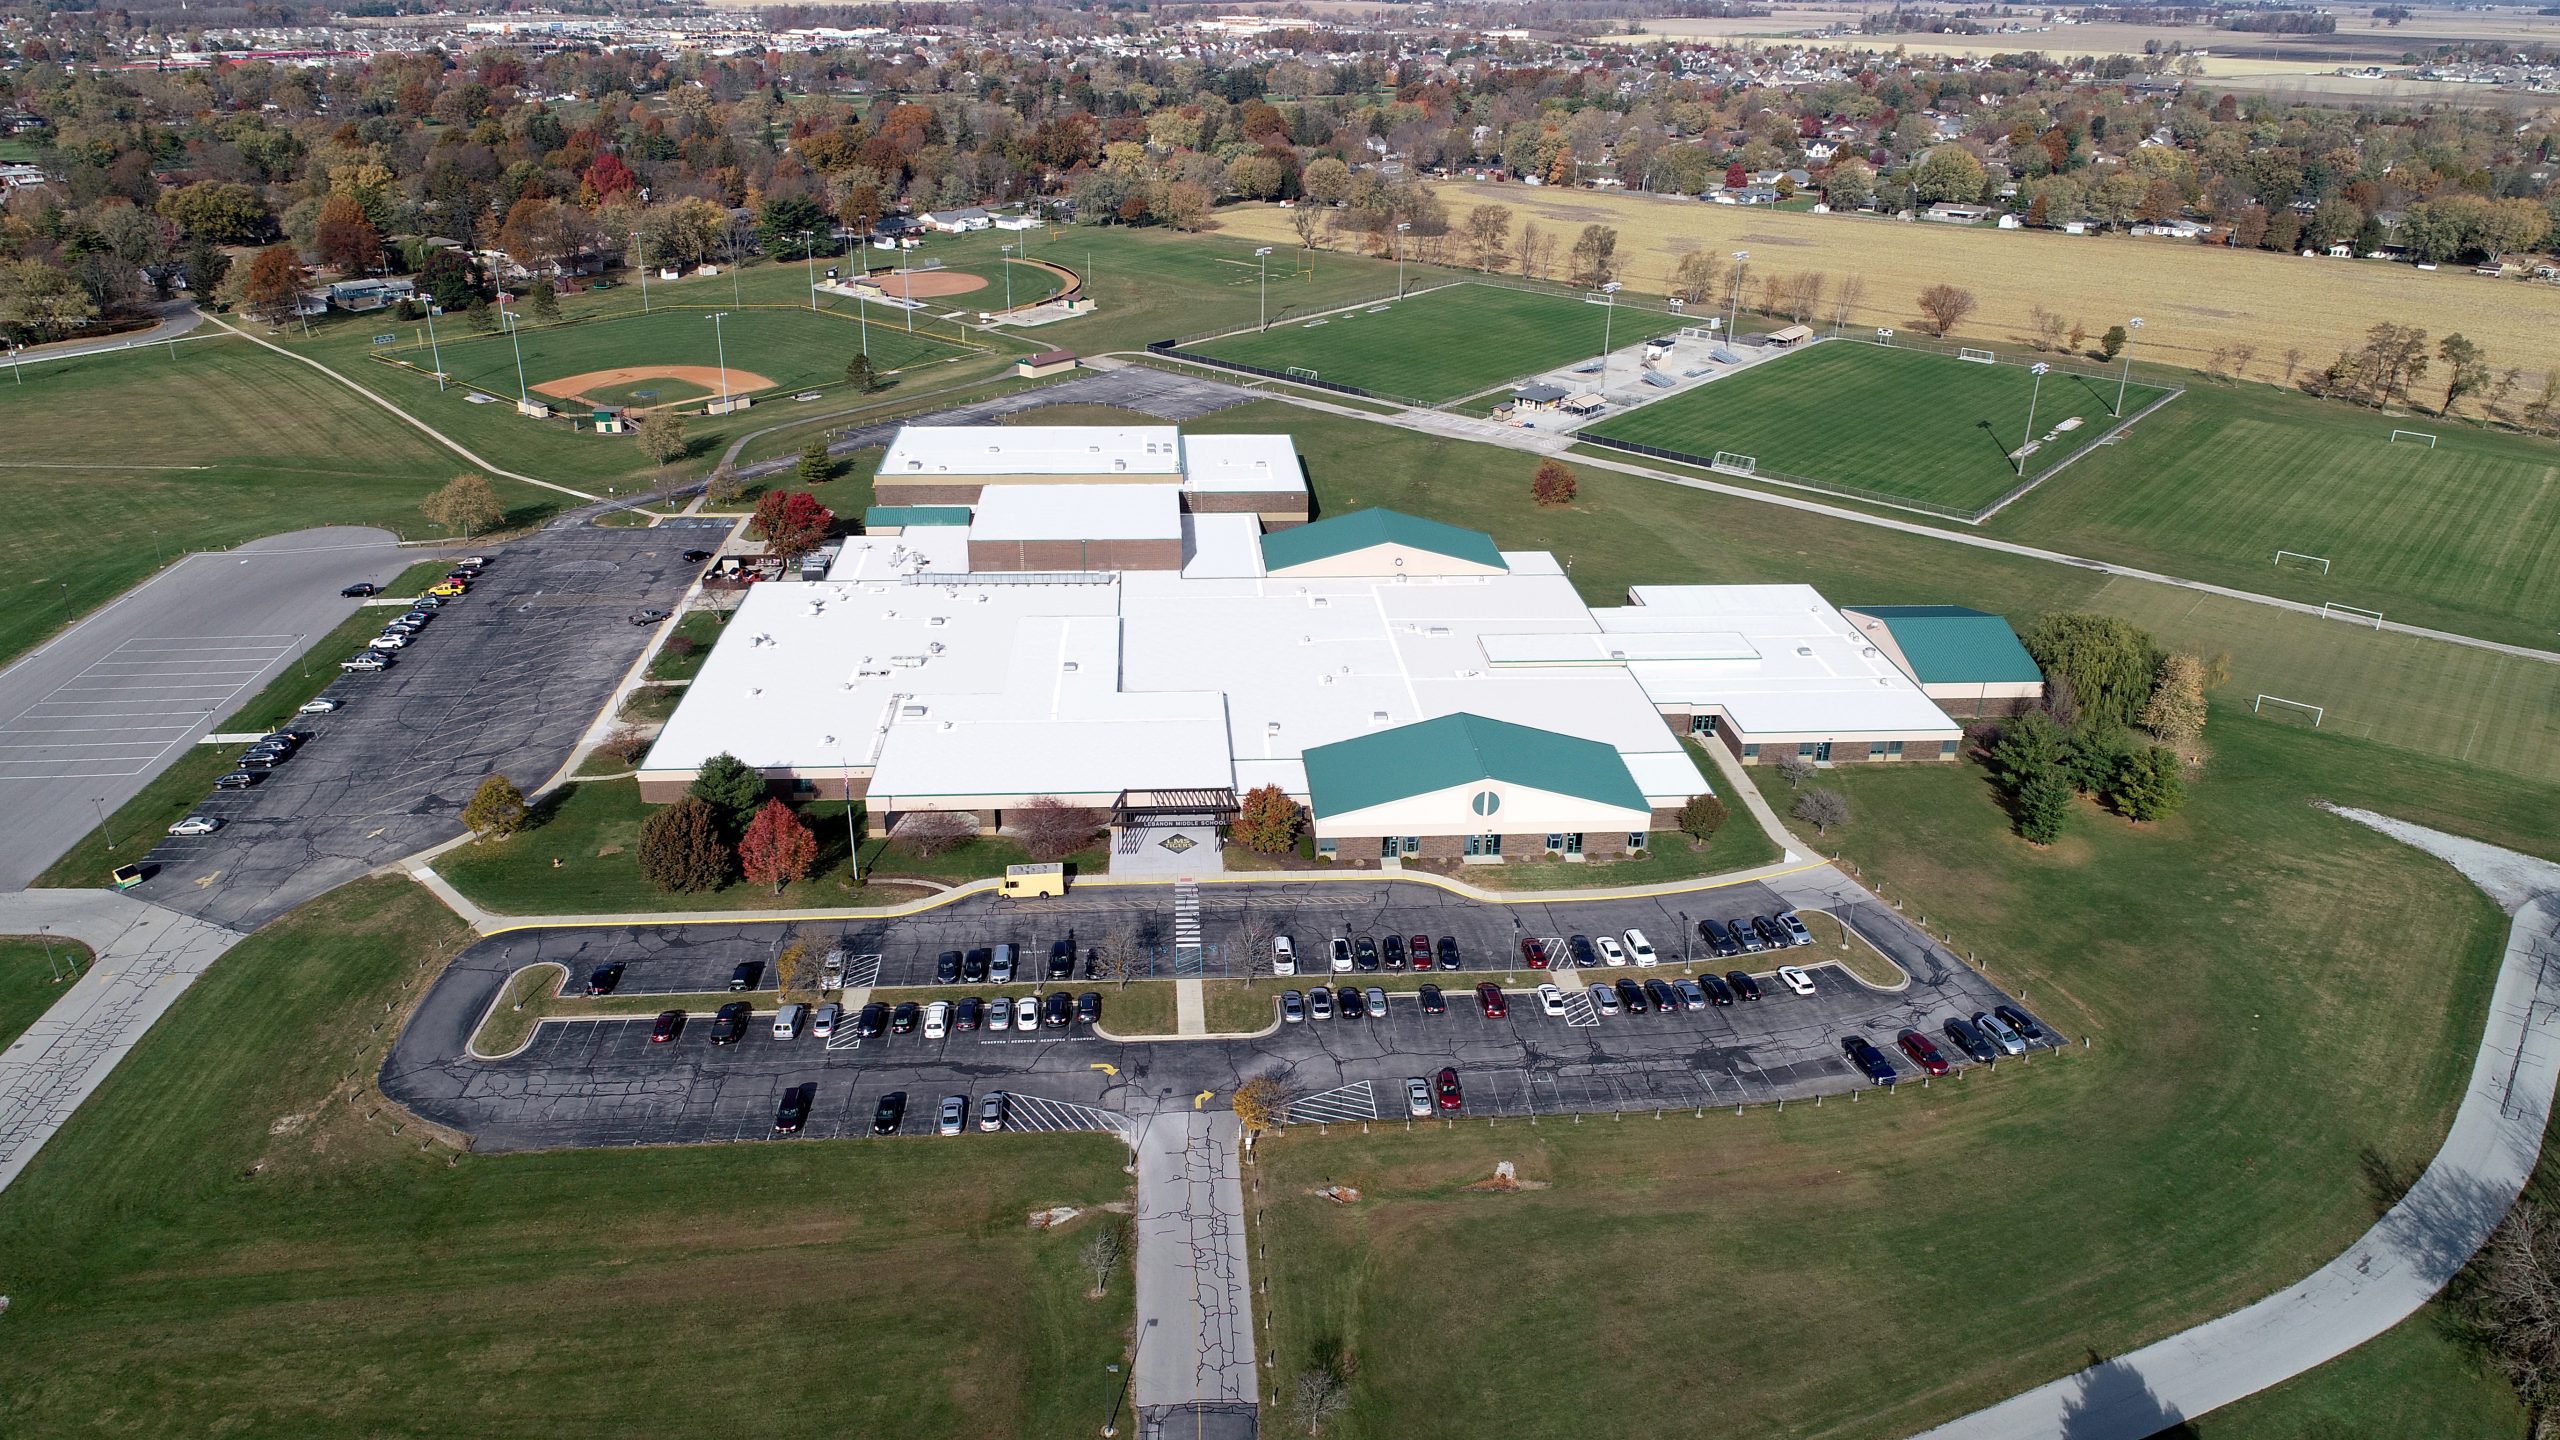 Lebanon middle school commercial roofing project by ce reeve roofing in Indiana